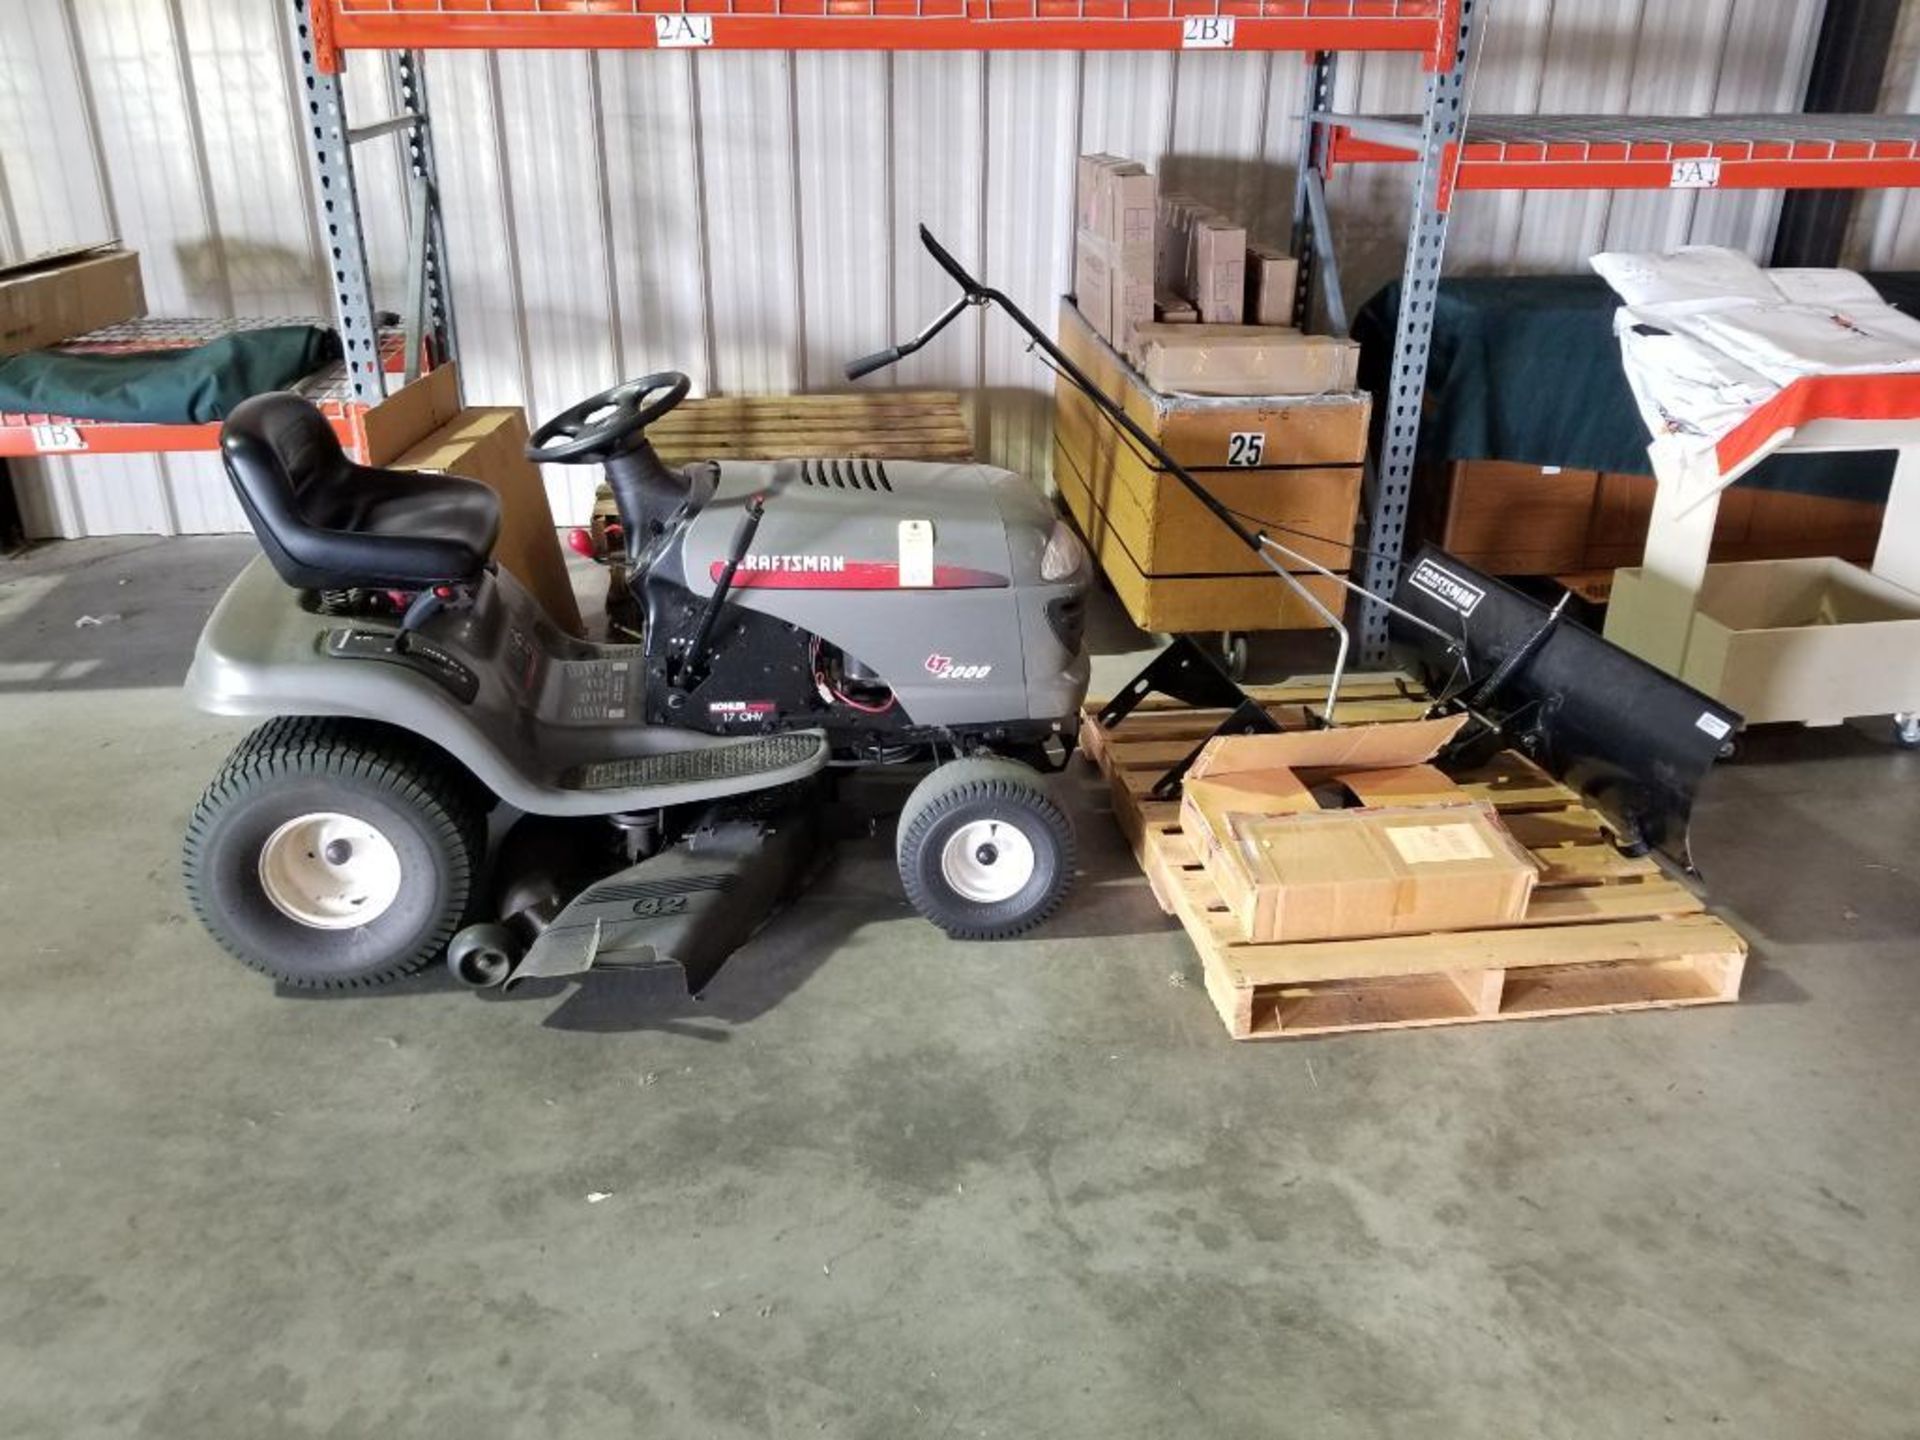 Craftsman riding lawnmower. LT2000, Kohler PRO 17hp engine. Includes snow blade and tire chains.